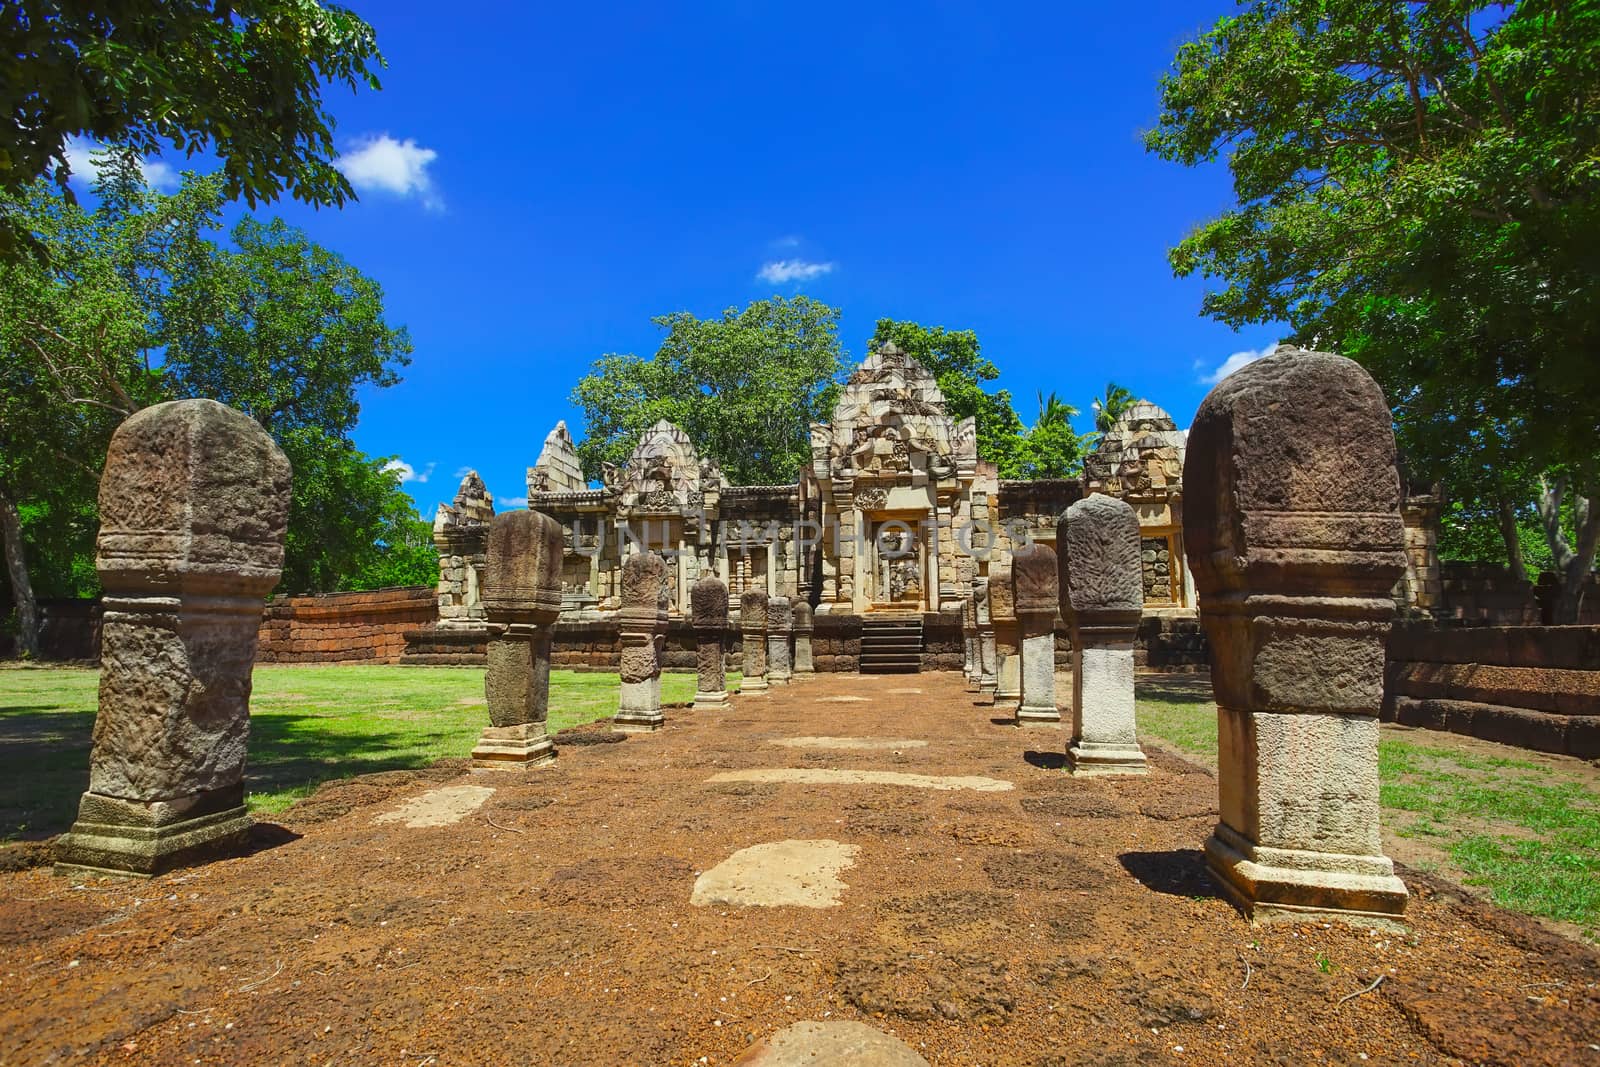 Beautiful scene of Sadok Kok Thom Historical Park, this is an 11th-century Khmer temple in present-day is in Sa Kaeo province, Thailand.